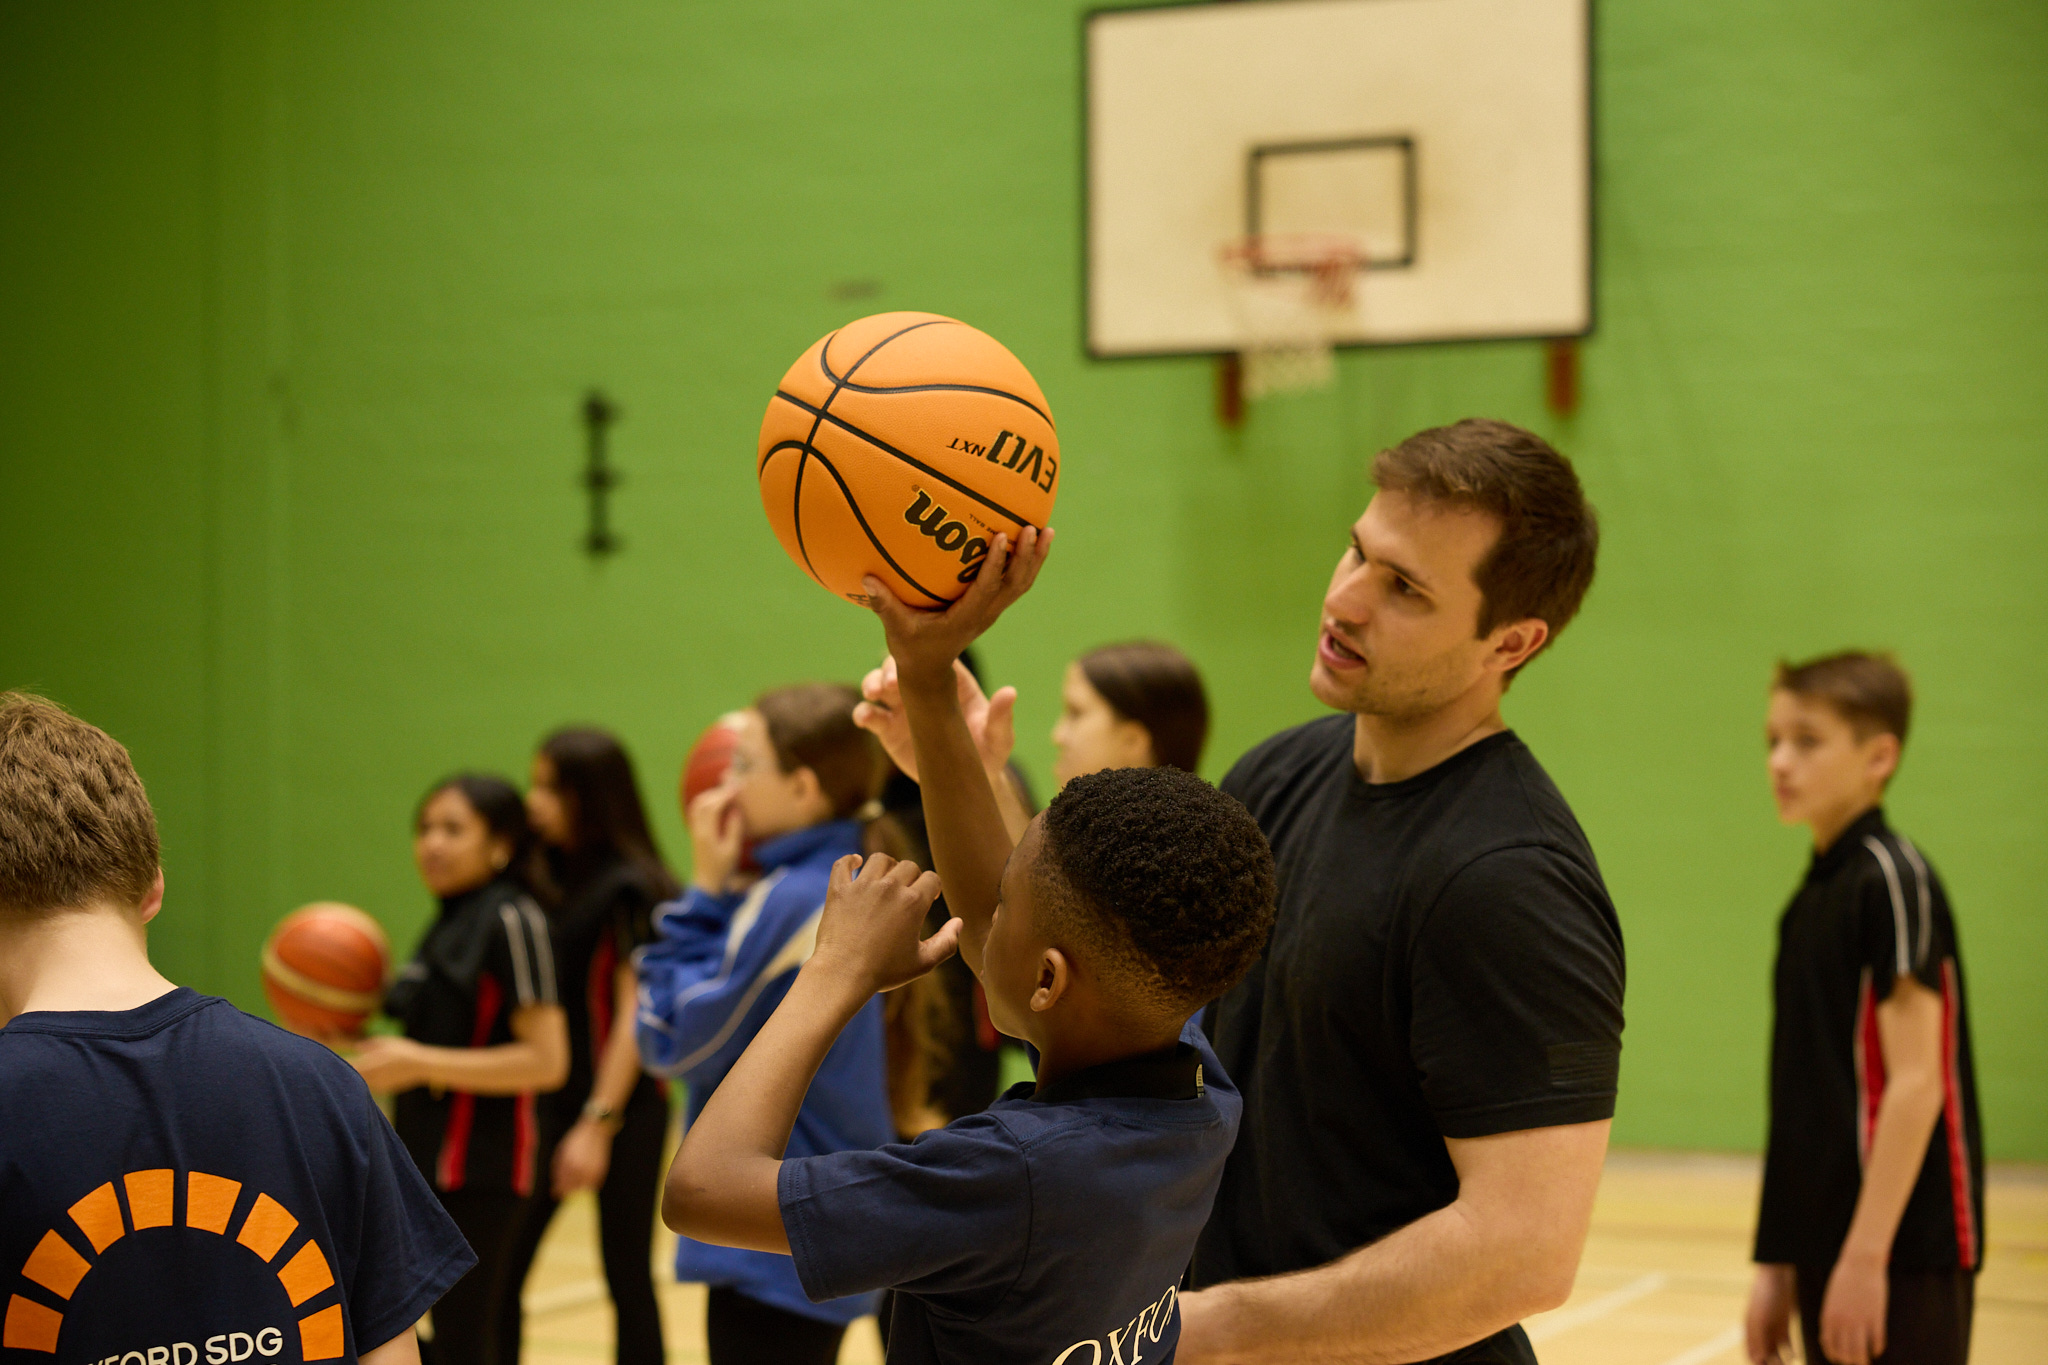 Pupils being instructed in basketball while practicing